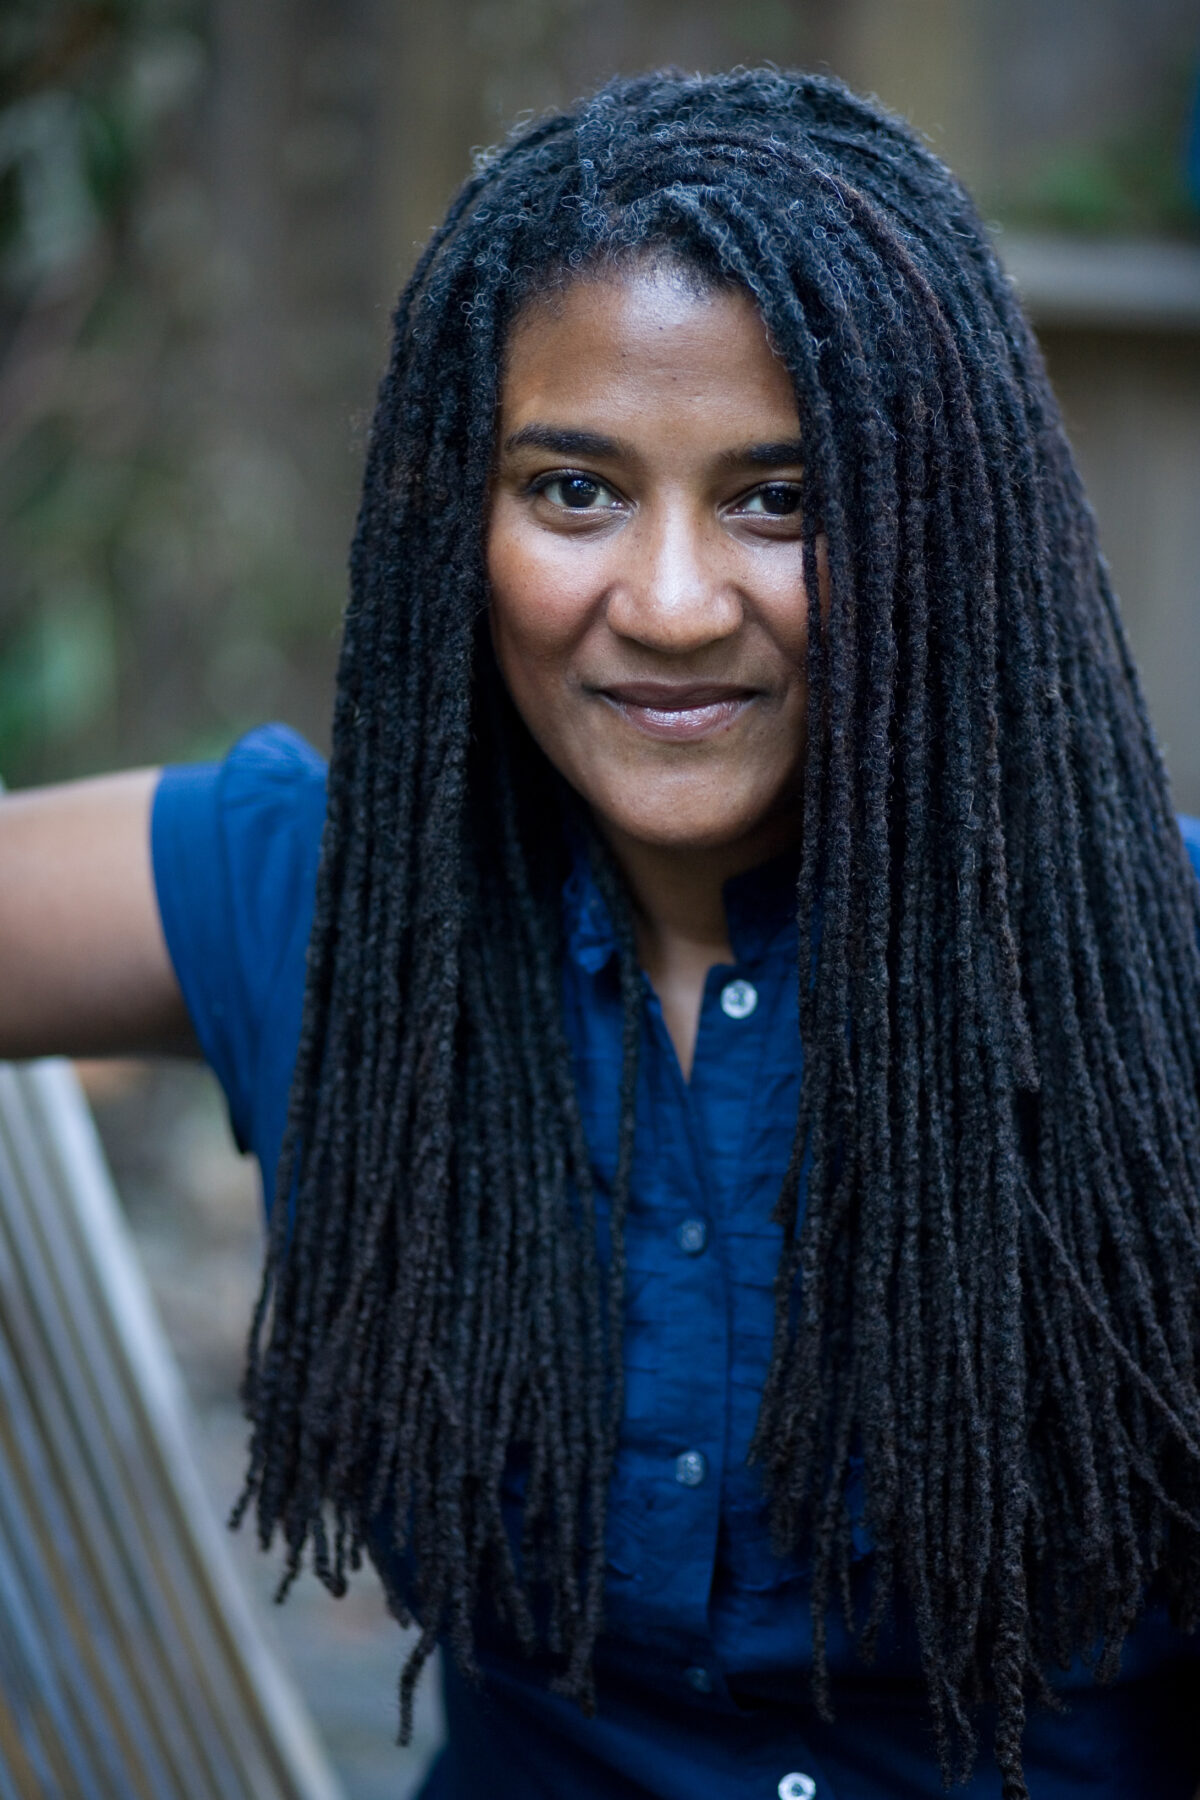 This Week in Black Art and Culture: Lynn Nottage is America’s Most Produced Playwright, JDilla and more